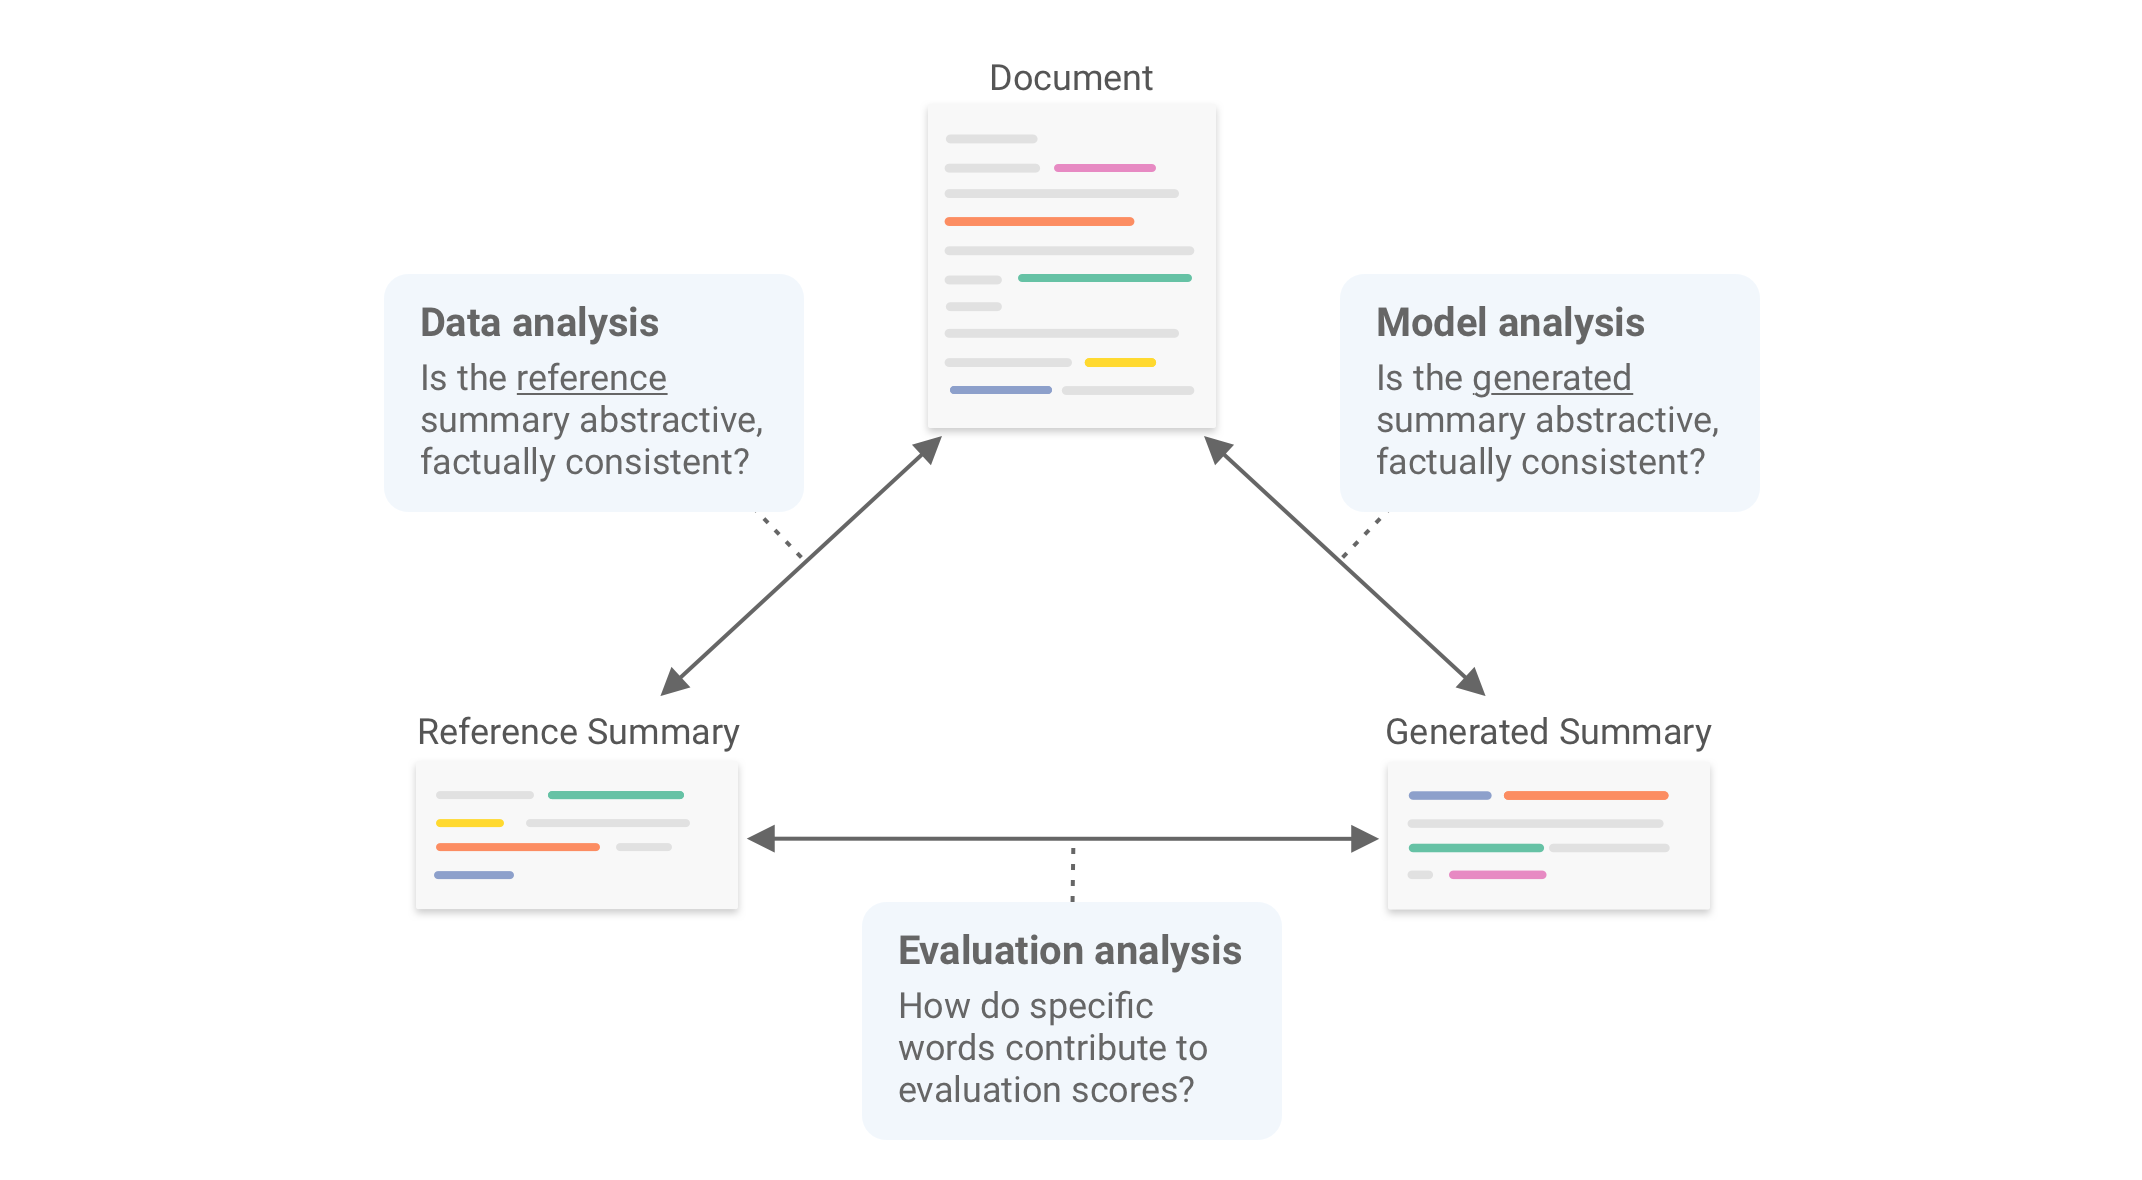 Relations between source, reference, and generated summaries